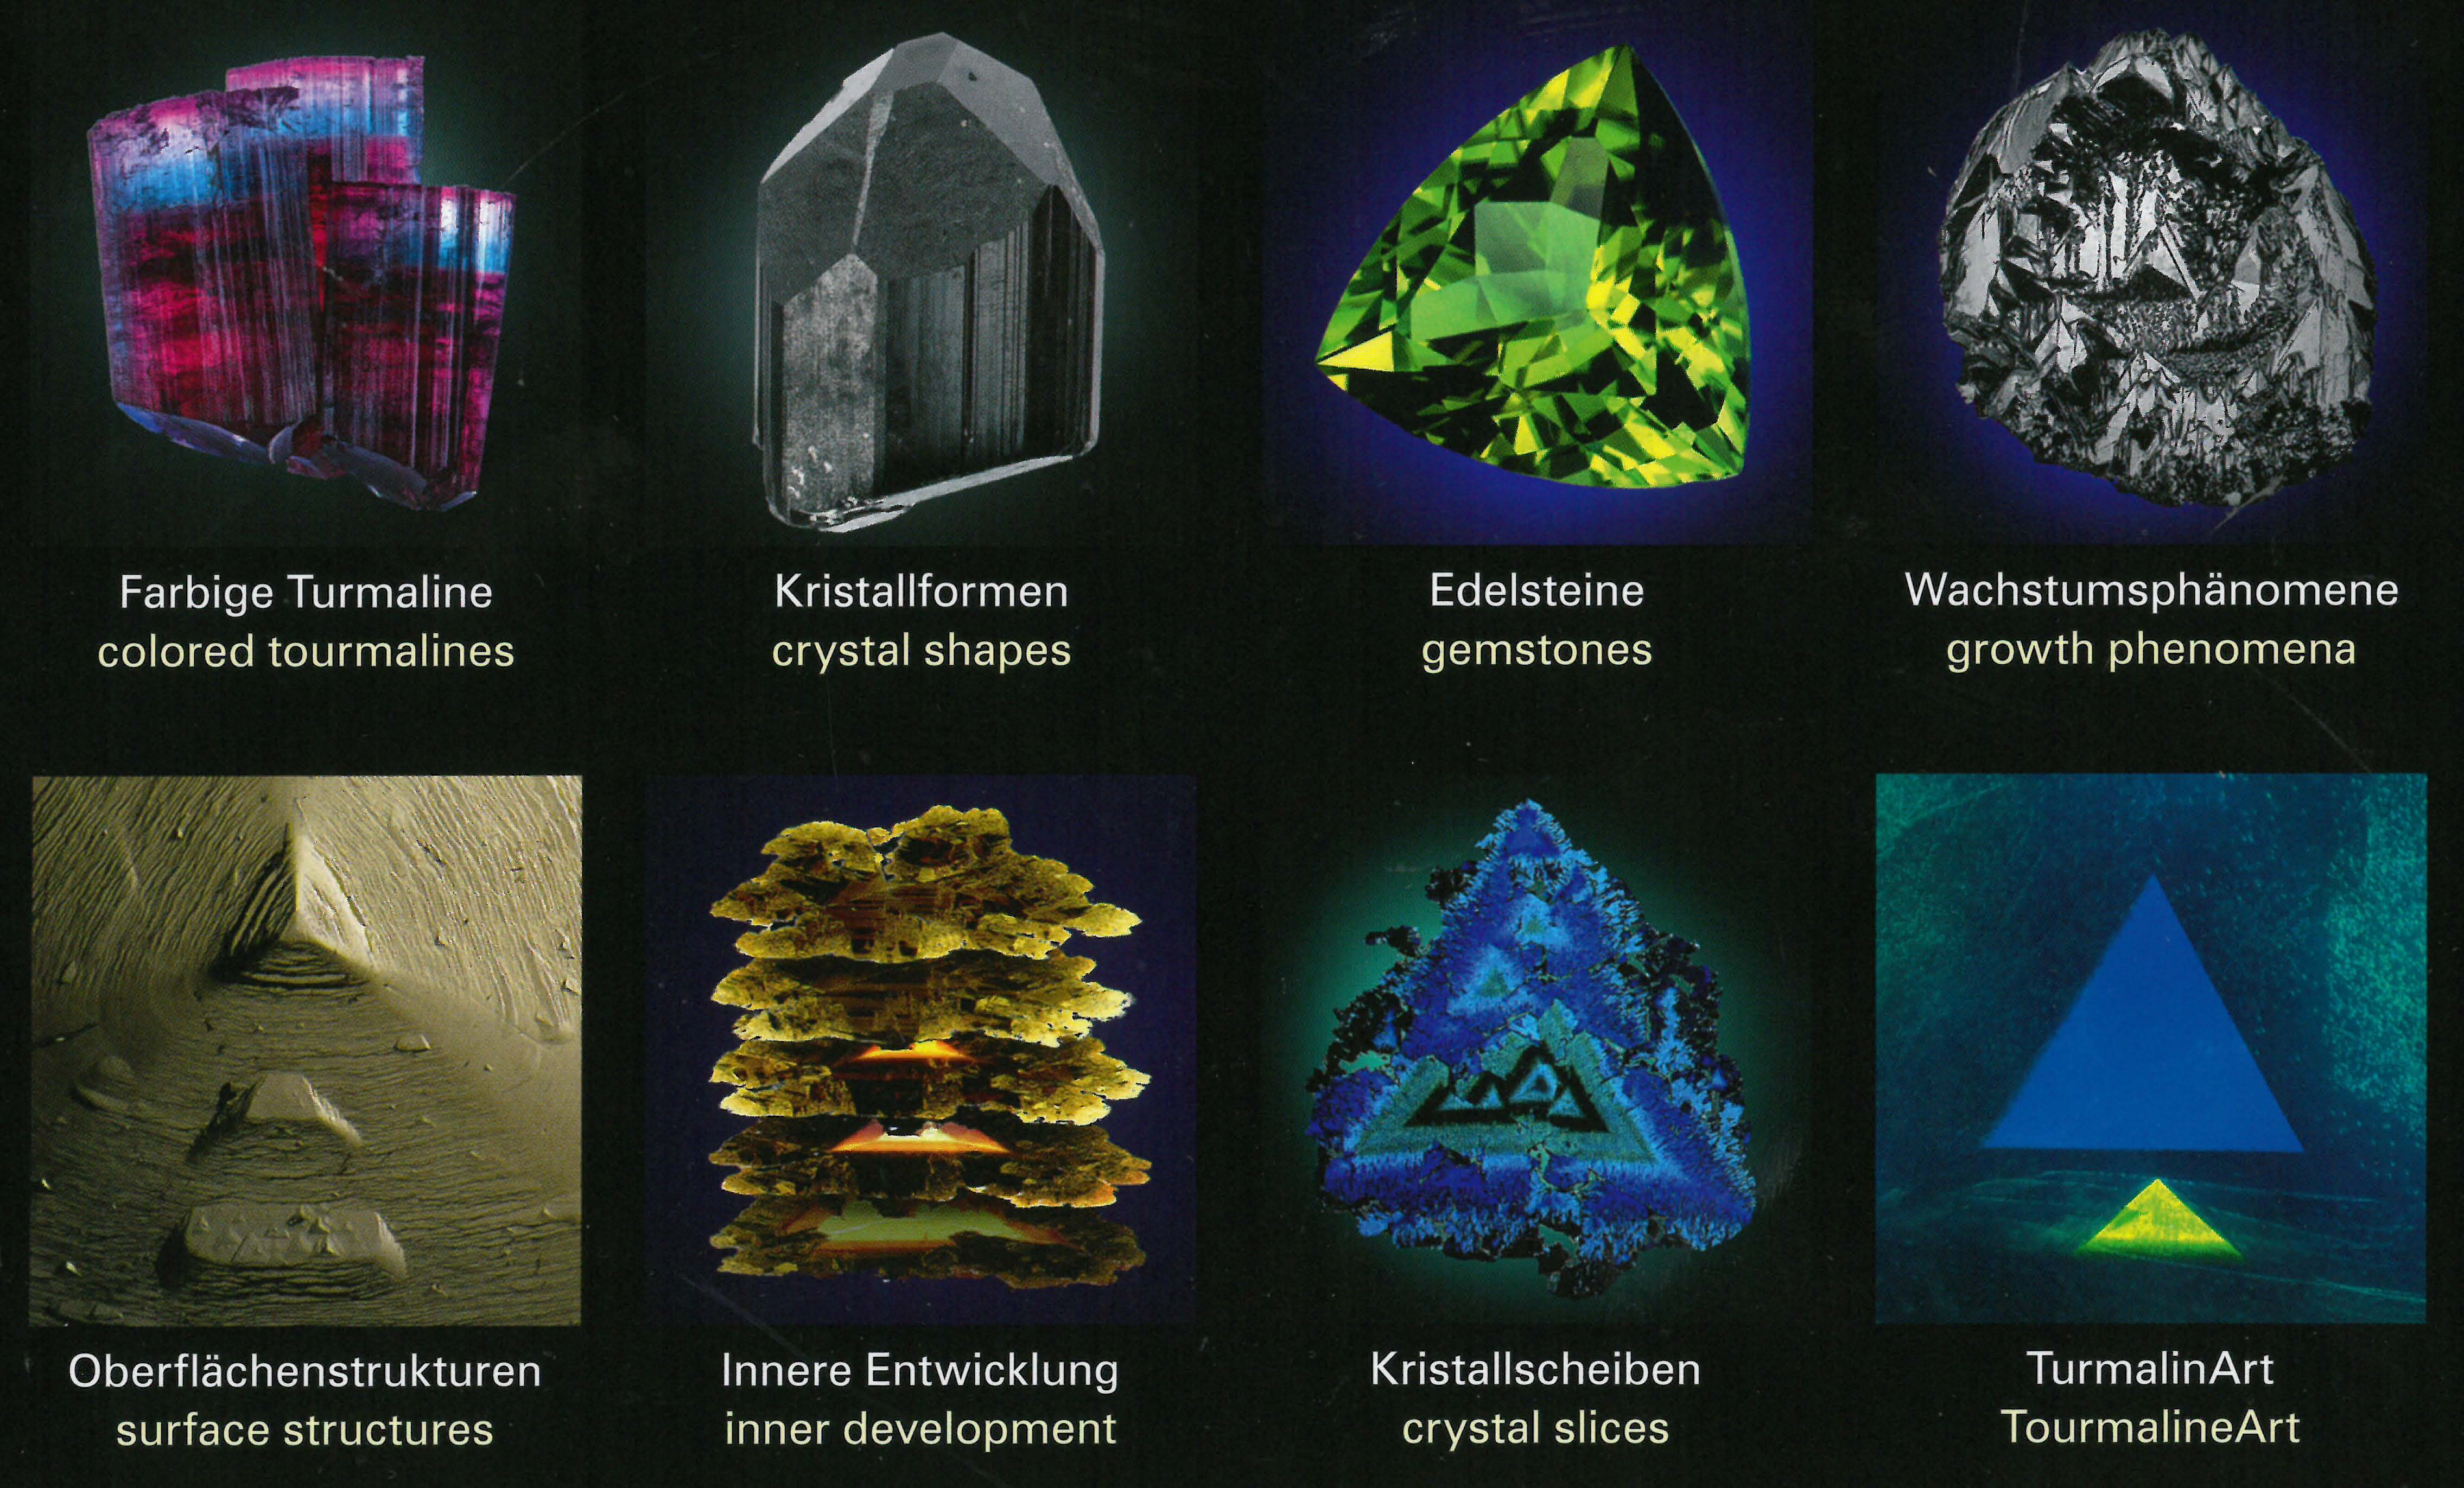 Back Cover from Tourmaline - Fascinating Crystals with Fantastic Inner Worlds